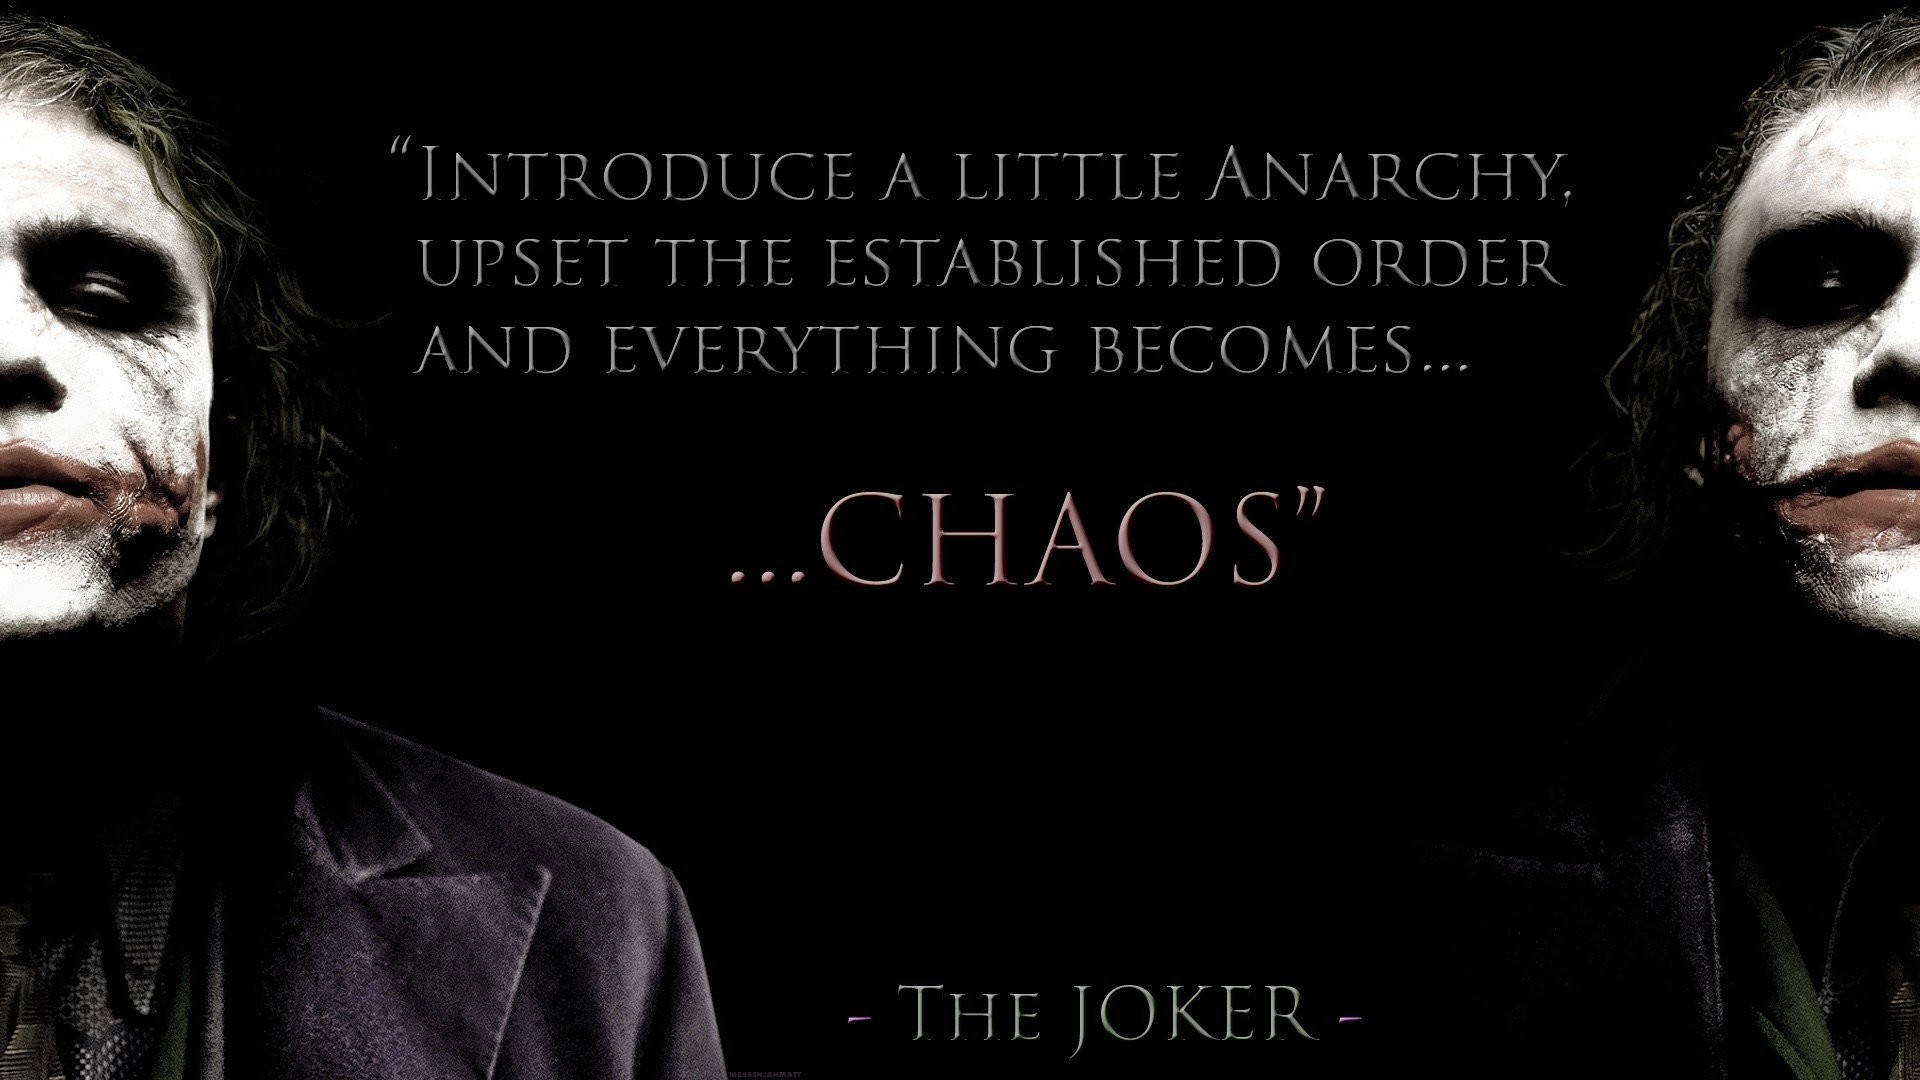 Joker's Quotes From Batman Background